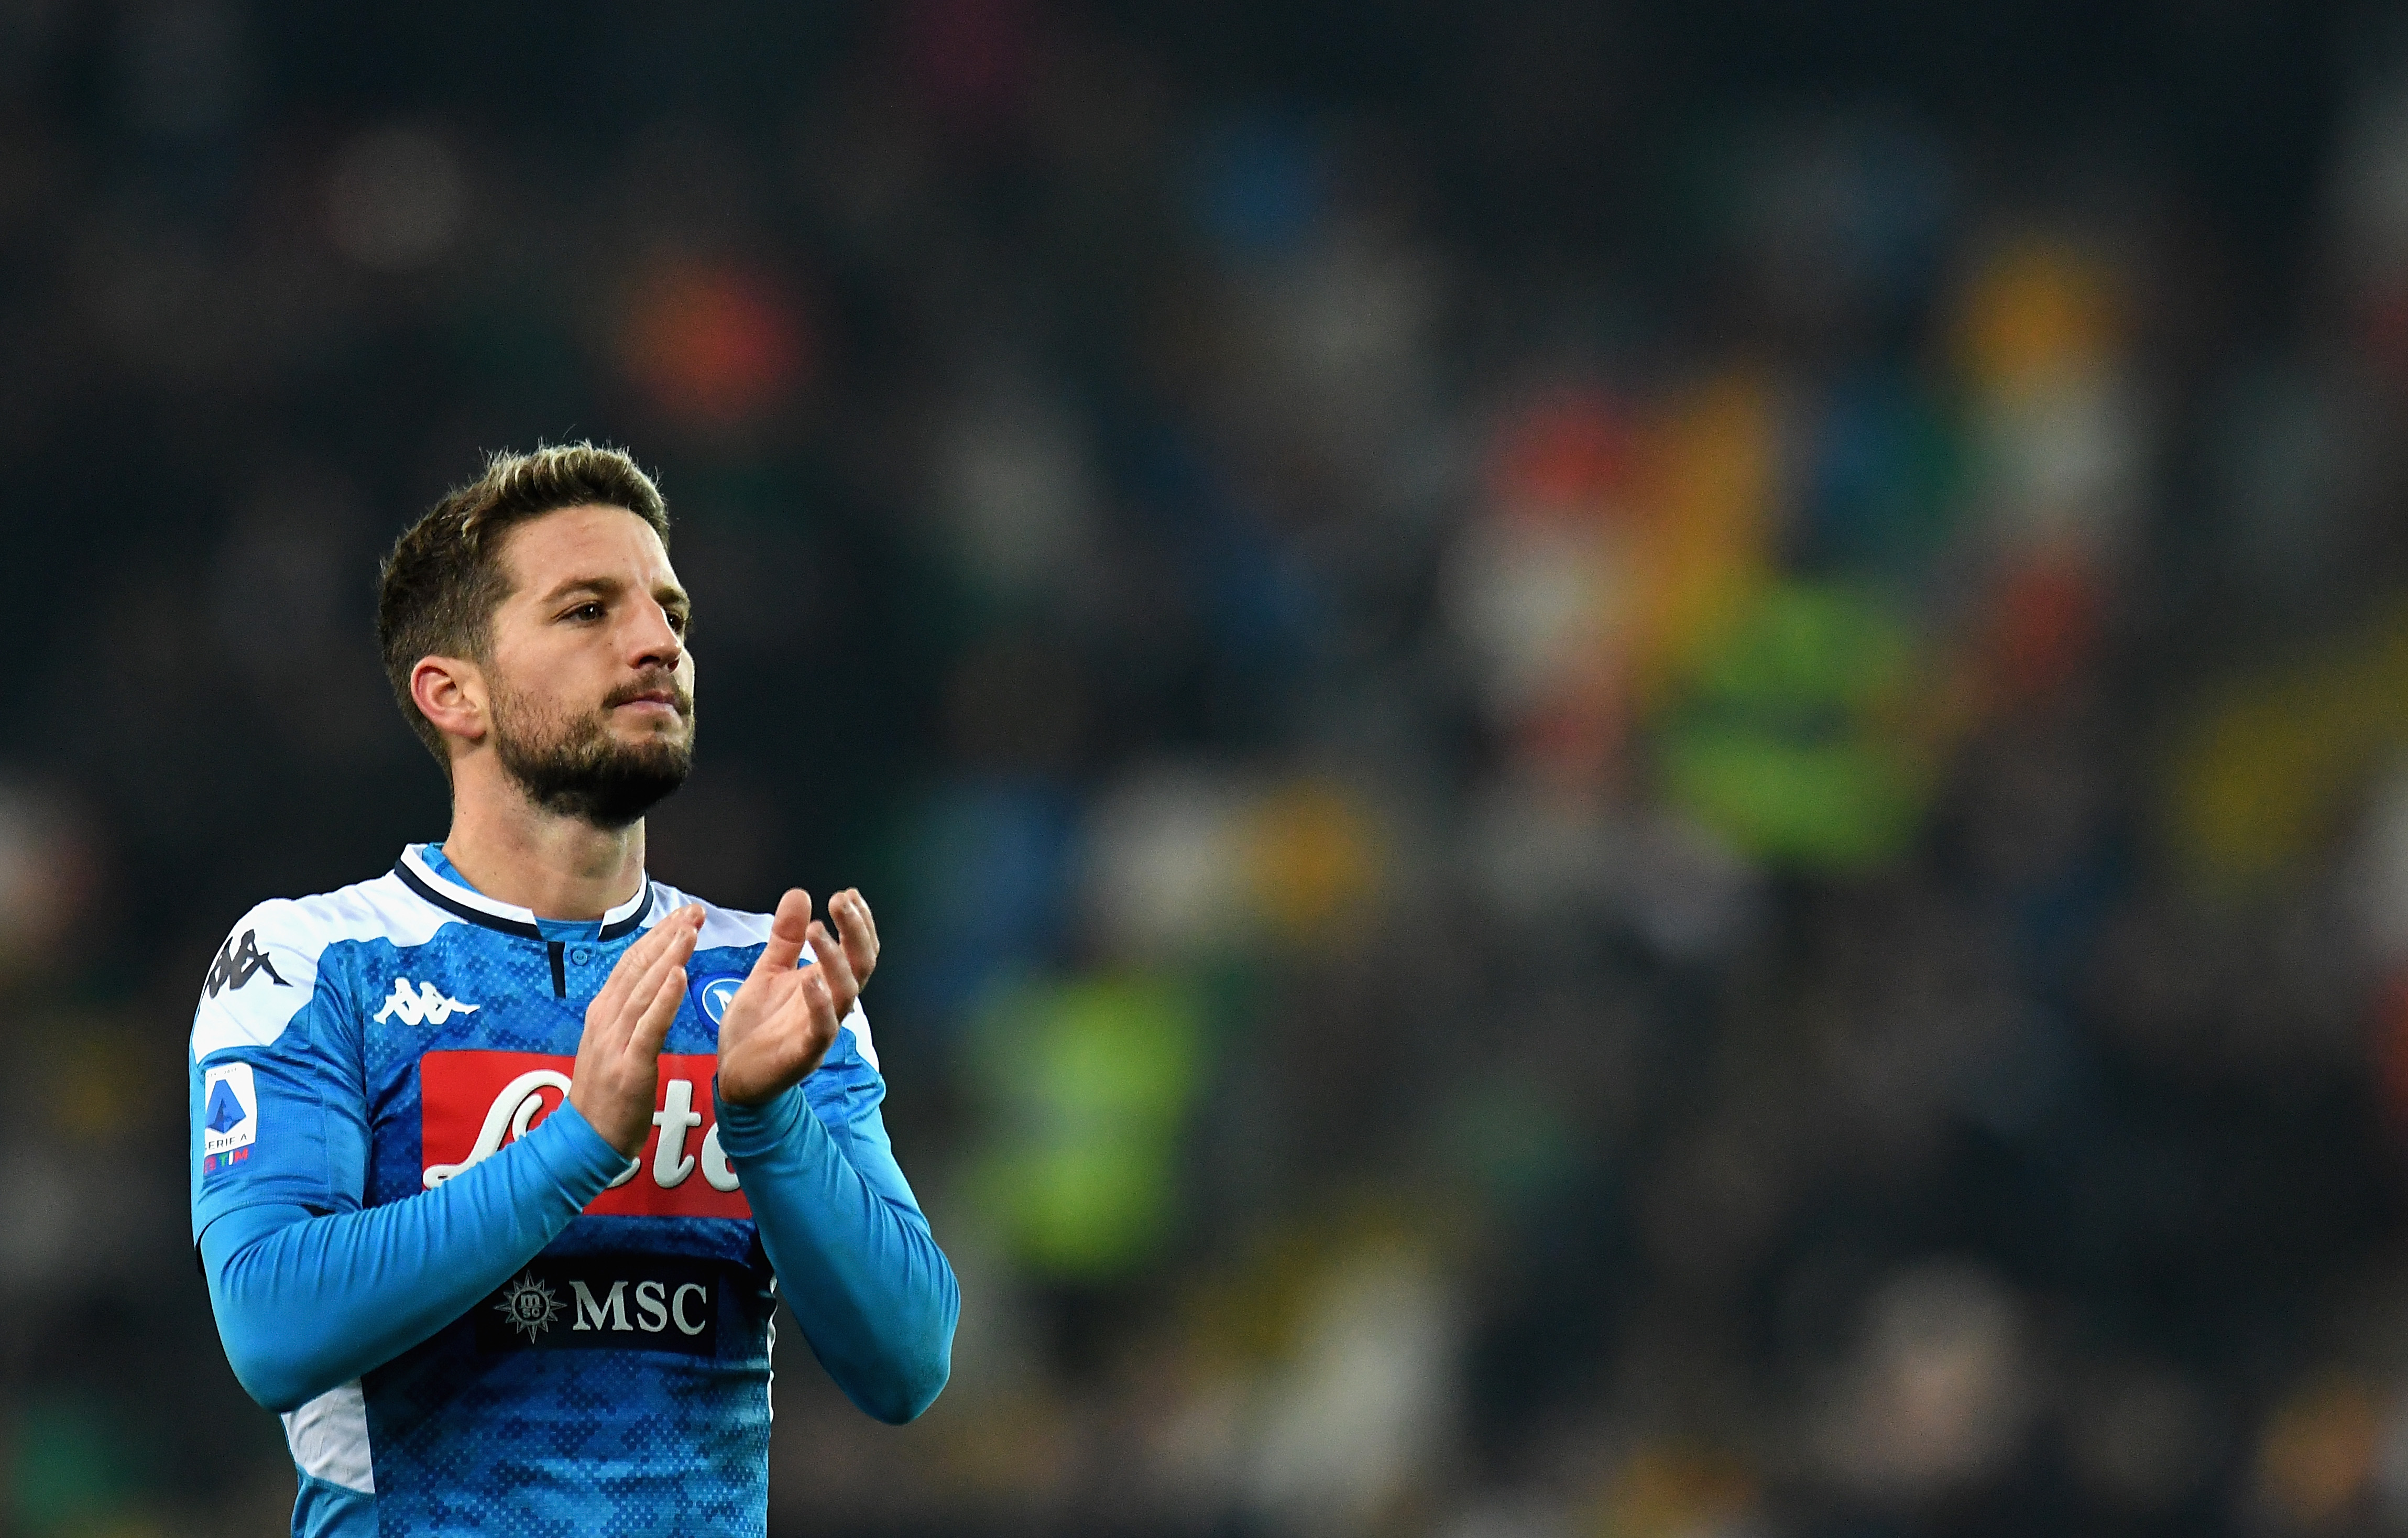 UDINE, ITALY - DECEMBER 07:  Dries Mertens of SSC Napoli greets his fans after the Serie A match between Udinese Calcio and SSC Napoli at Stadio Friuli on December 7, 2019 in Udine, Italy.  (Photo by Alessandro Sabattini/Getty Images)